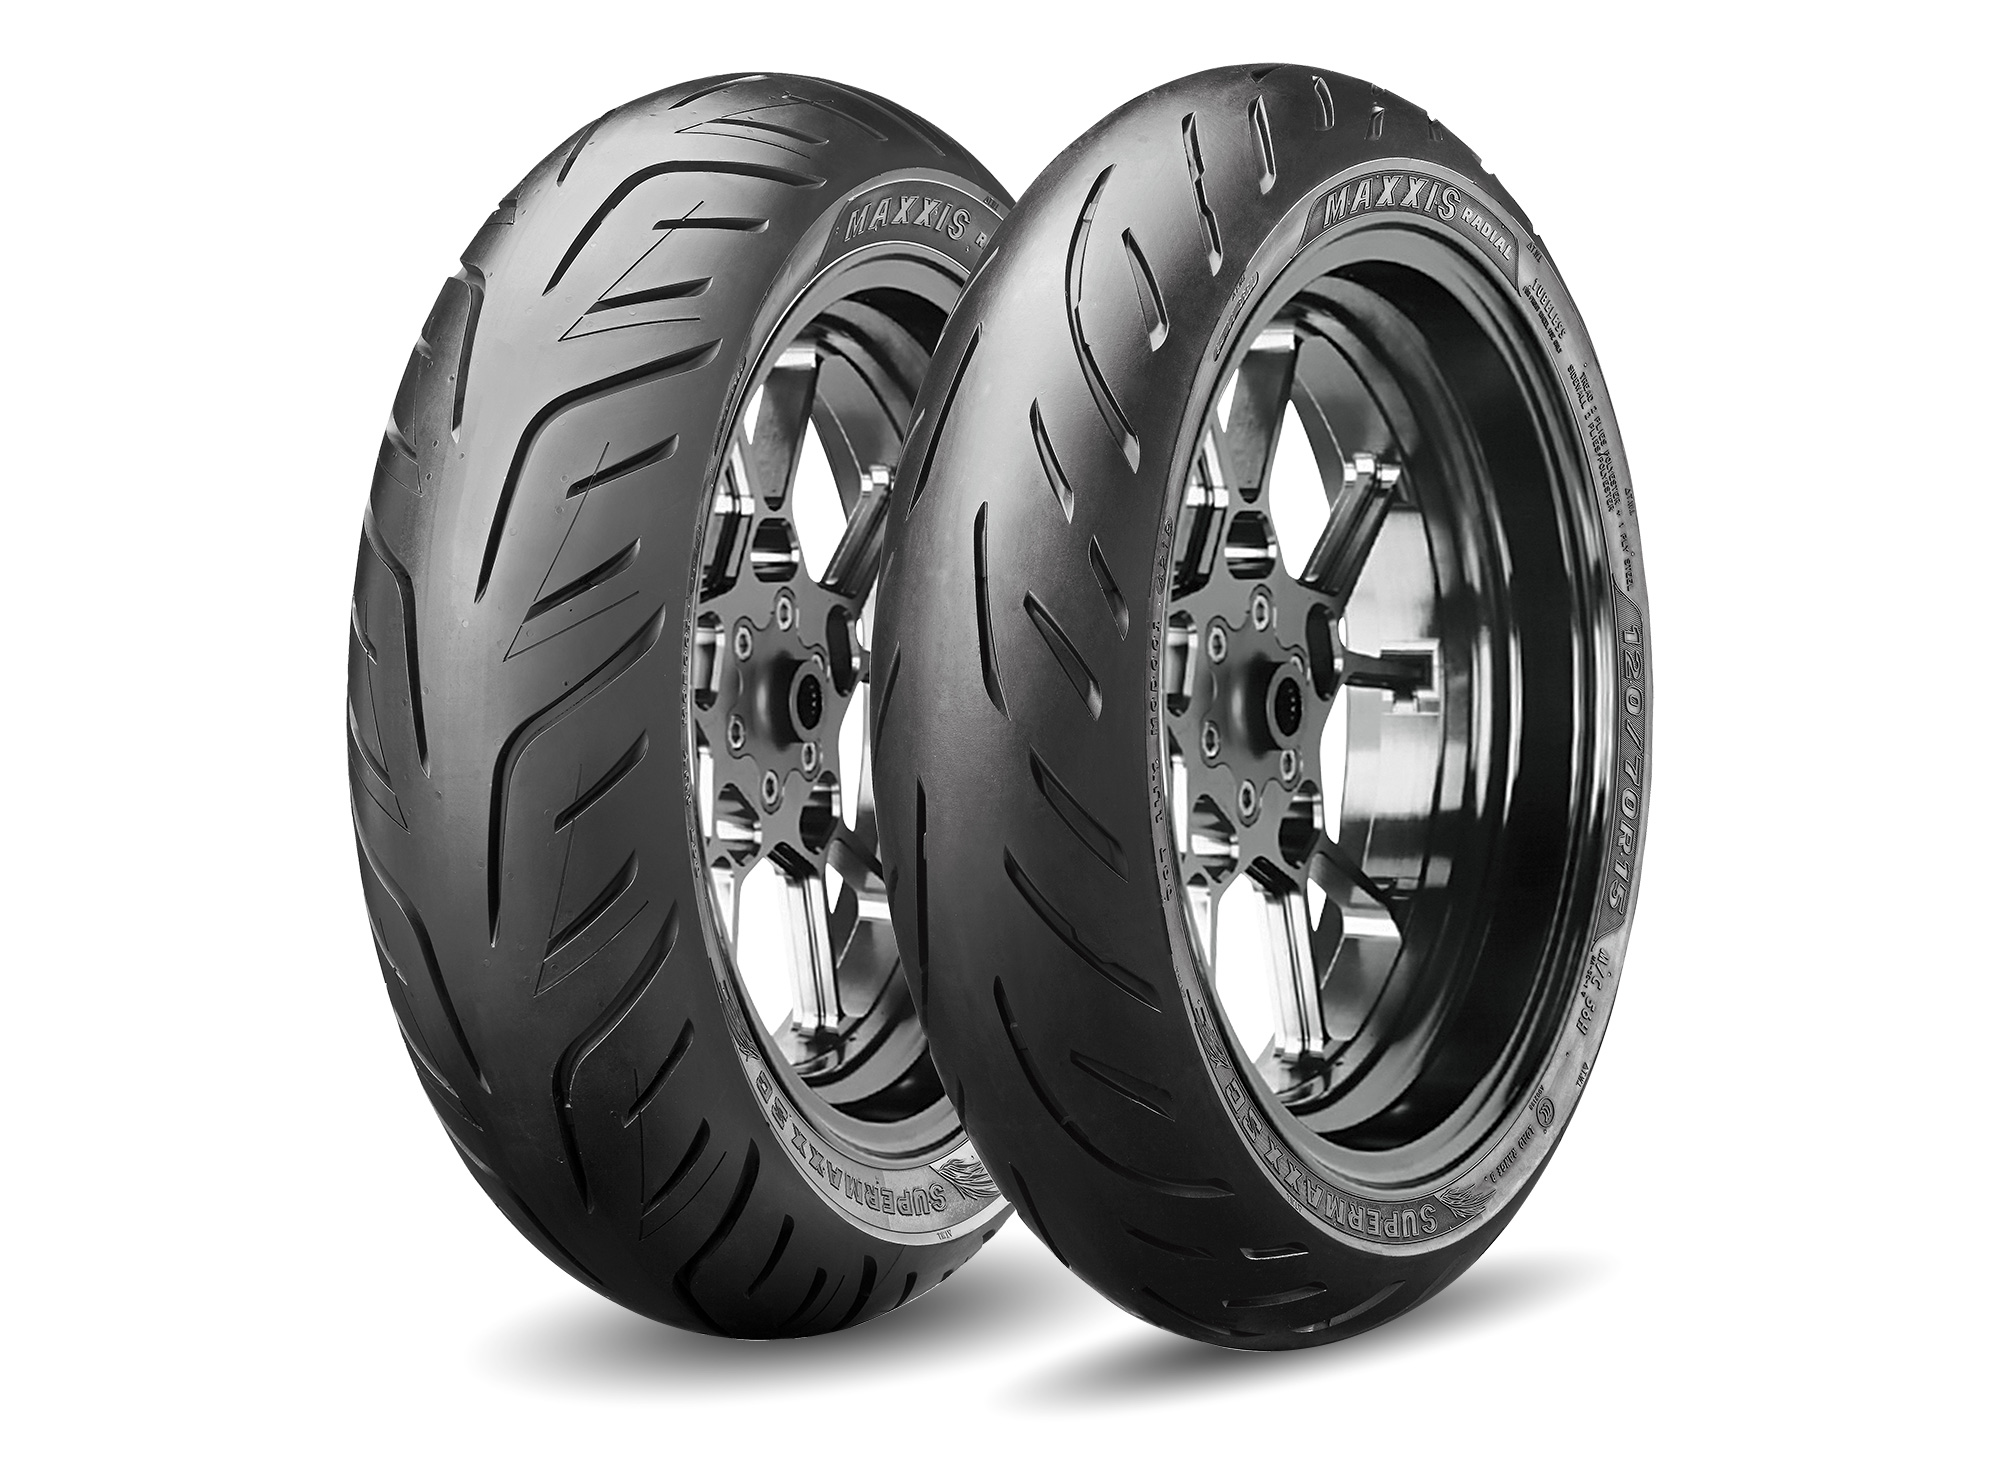 Supermaxx SC scooter tires